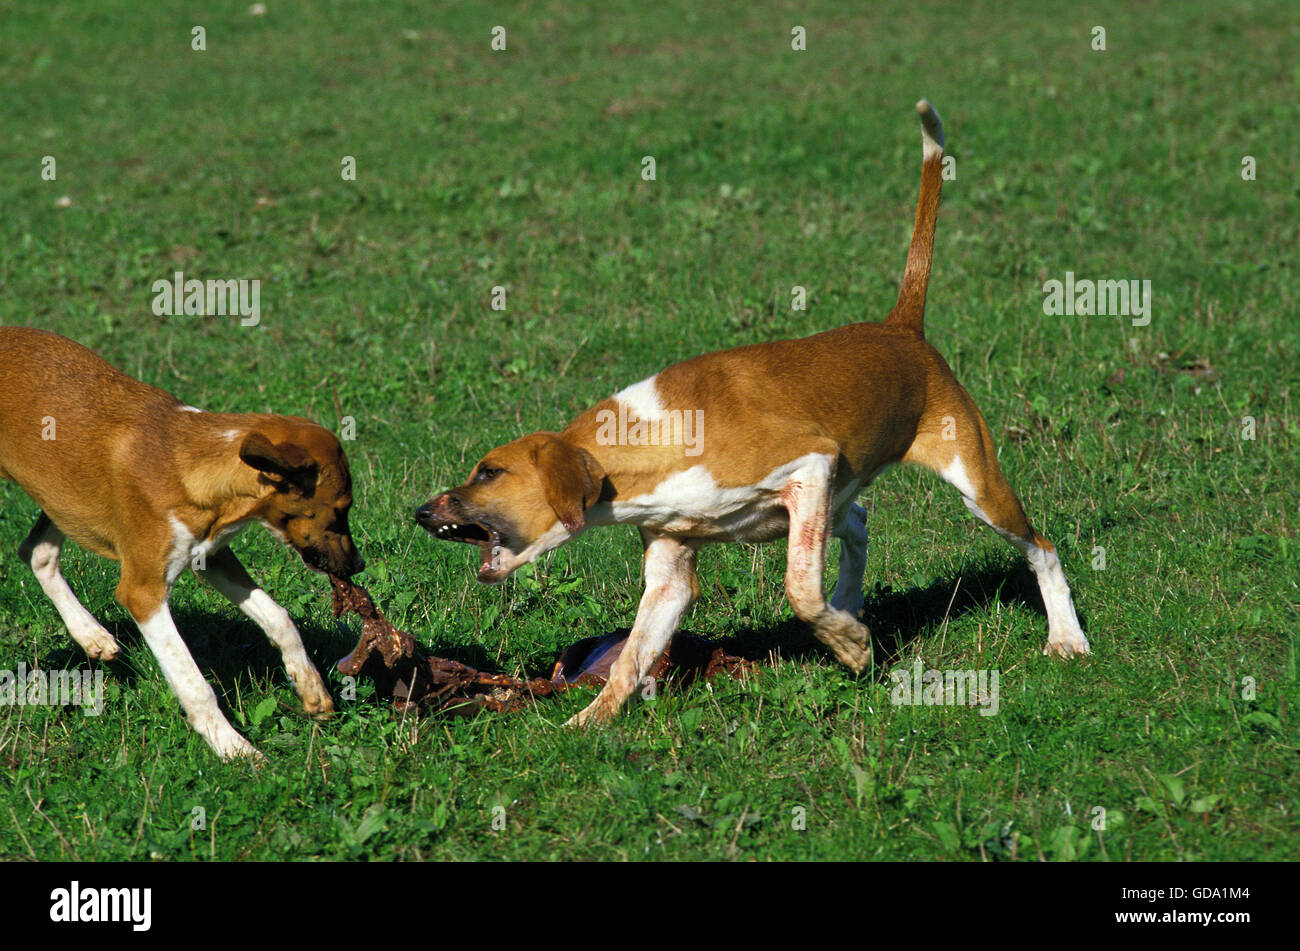 Great Anglo-French White and Orange Hound, Dog eating Game animal Stock Photo